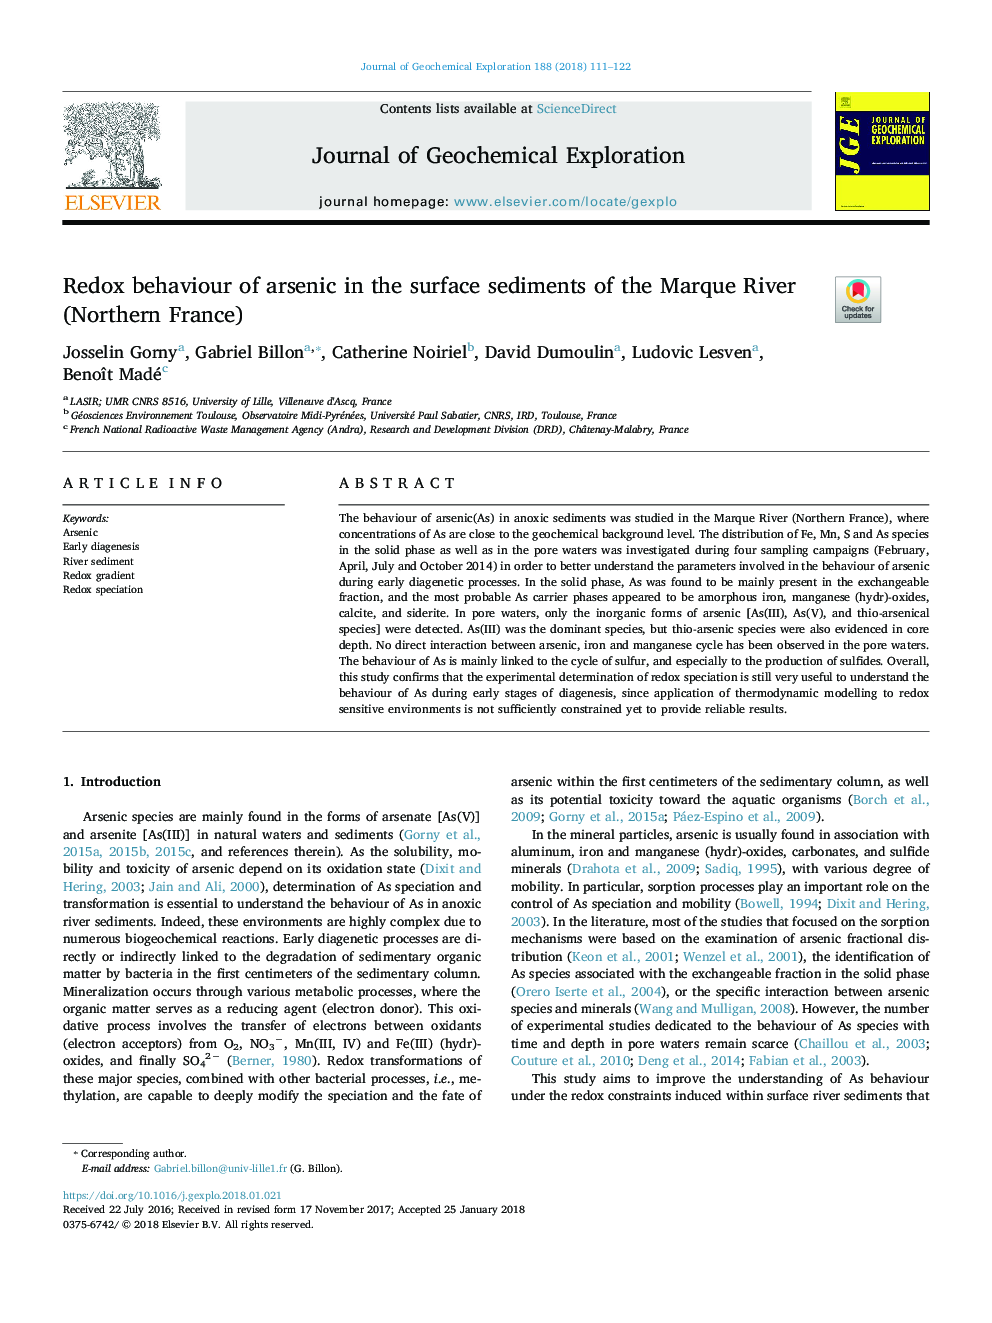 Redox behaviour of arsenic in the surface sediments of the Marque River (Northern France)